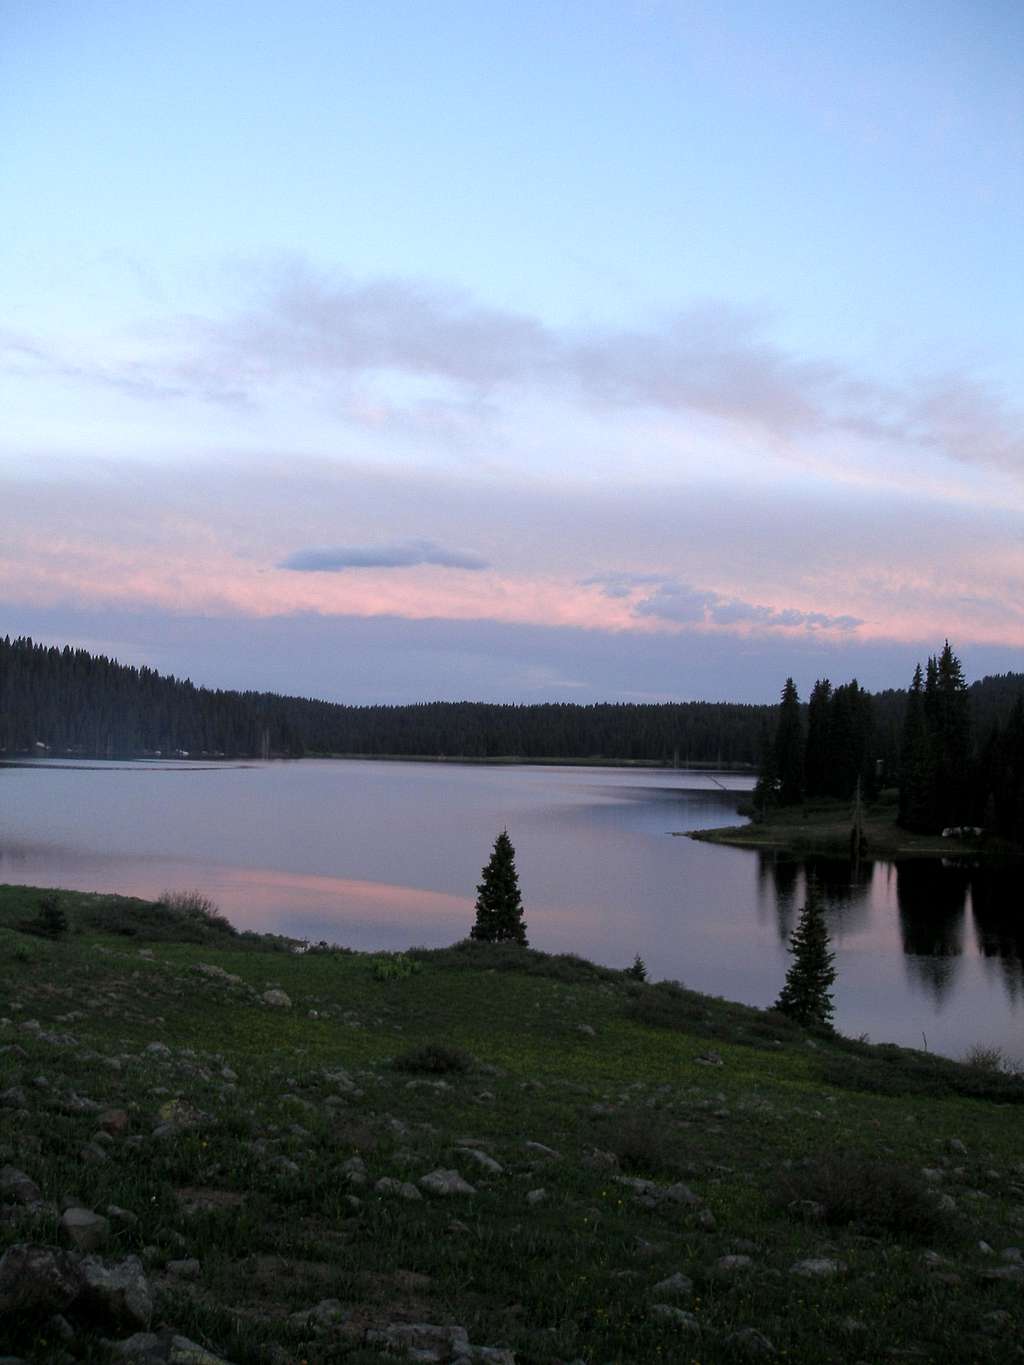 Camping on the Grand Mesa